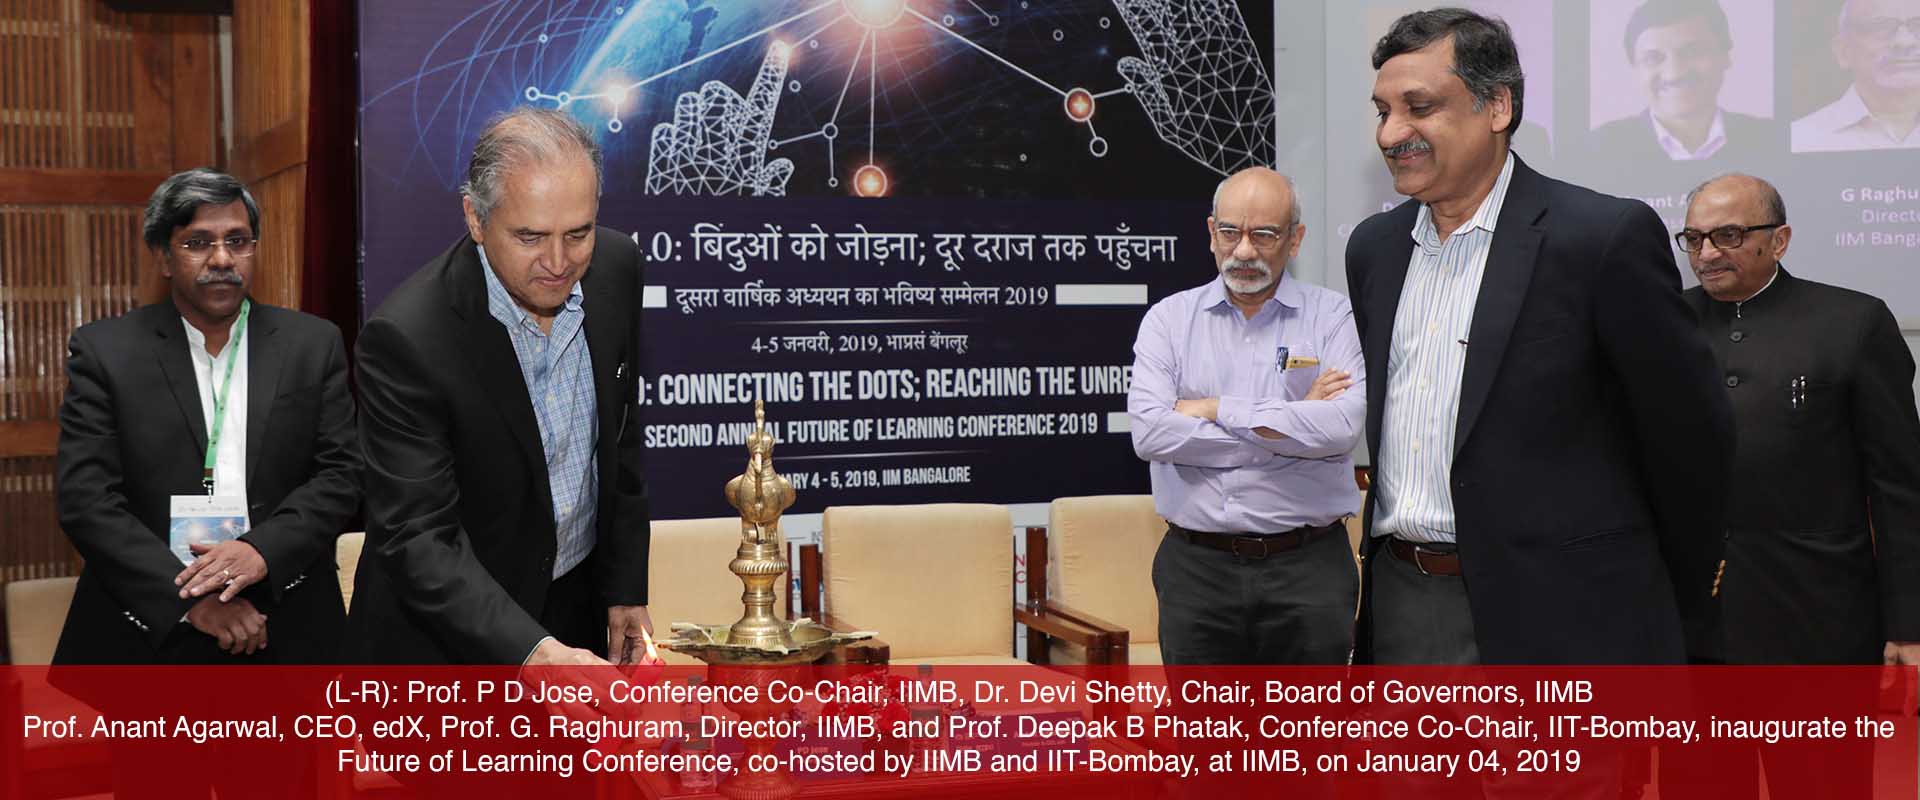 IIMB & IIT Bombay host 2nd Annual Future of Learning Conference, ‘Learning 4.0: Connecting the Dots and Reaching the Unreached’ at IIMB on January 04 & 05